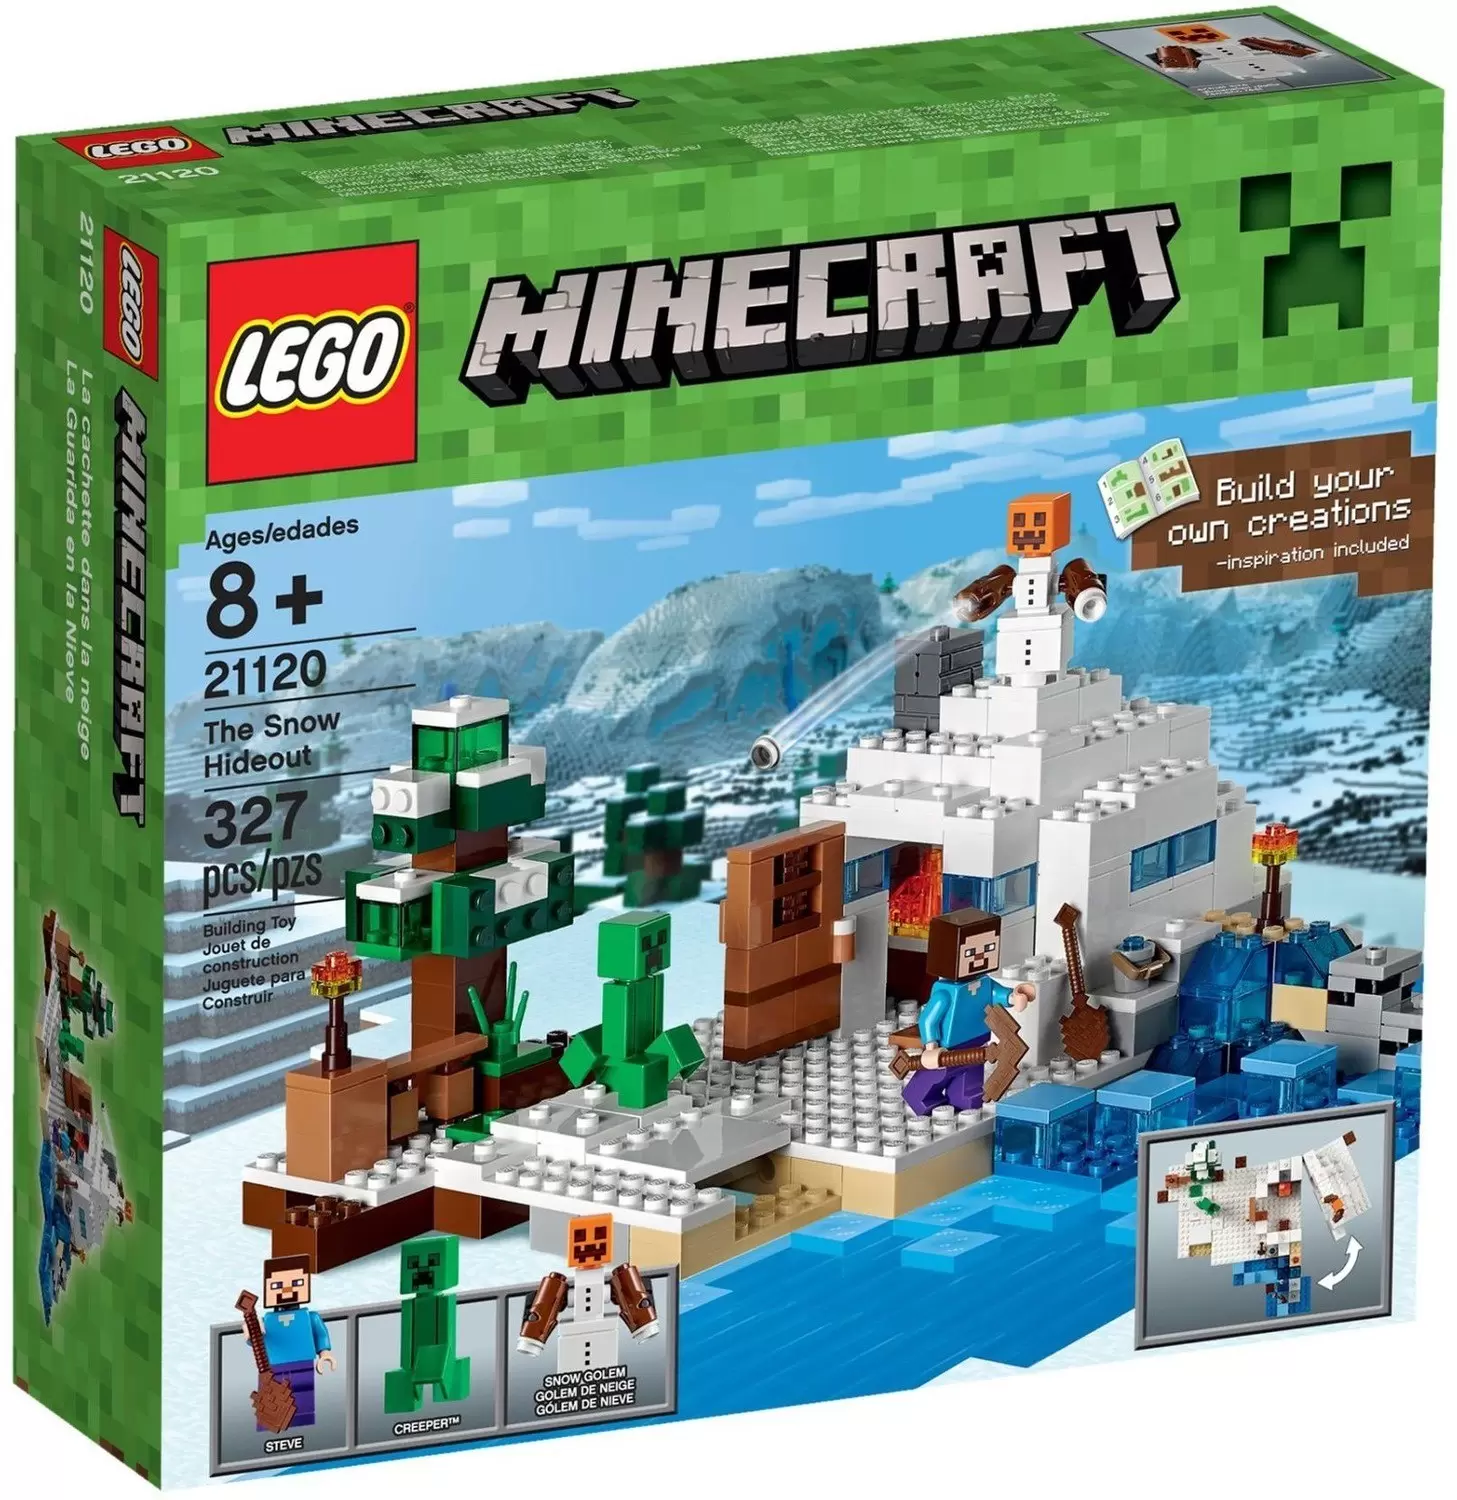 LEGO Minecraft - The Snow Hideout